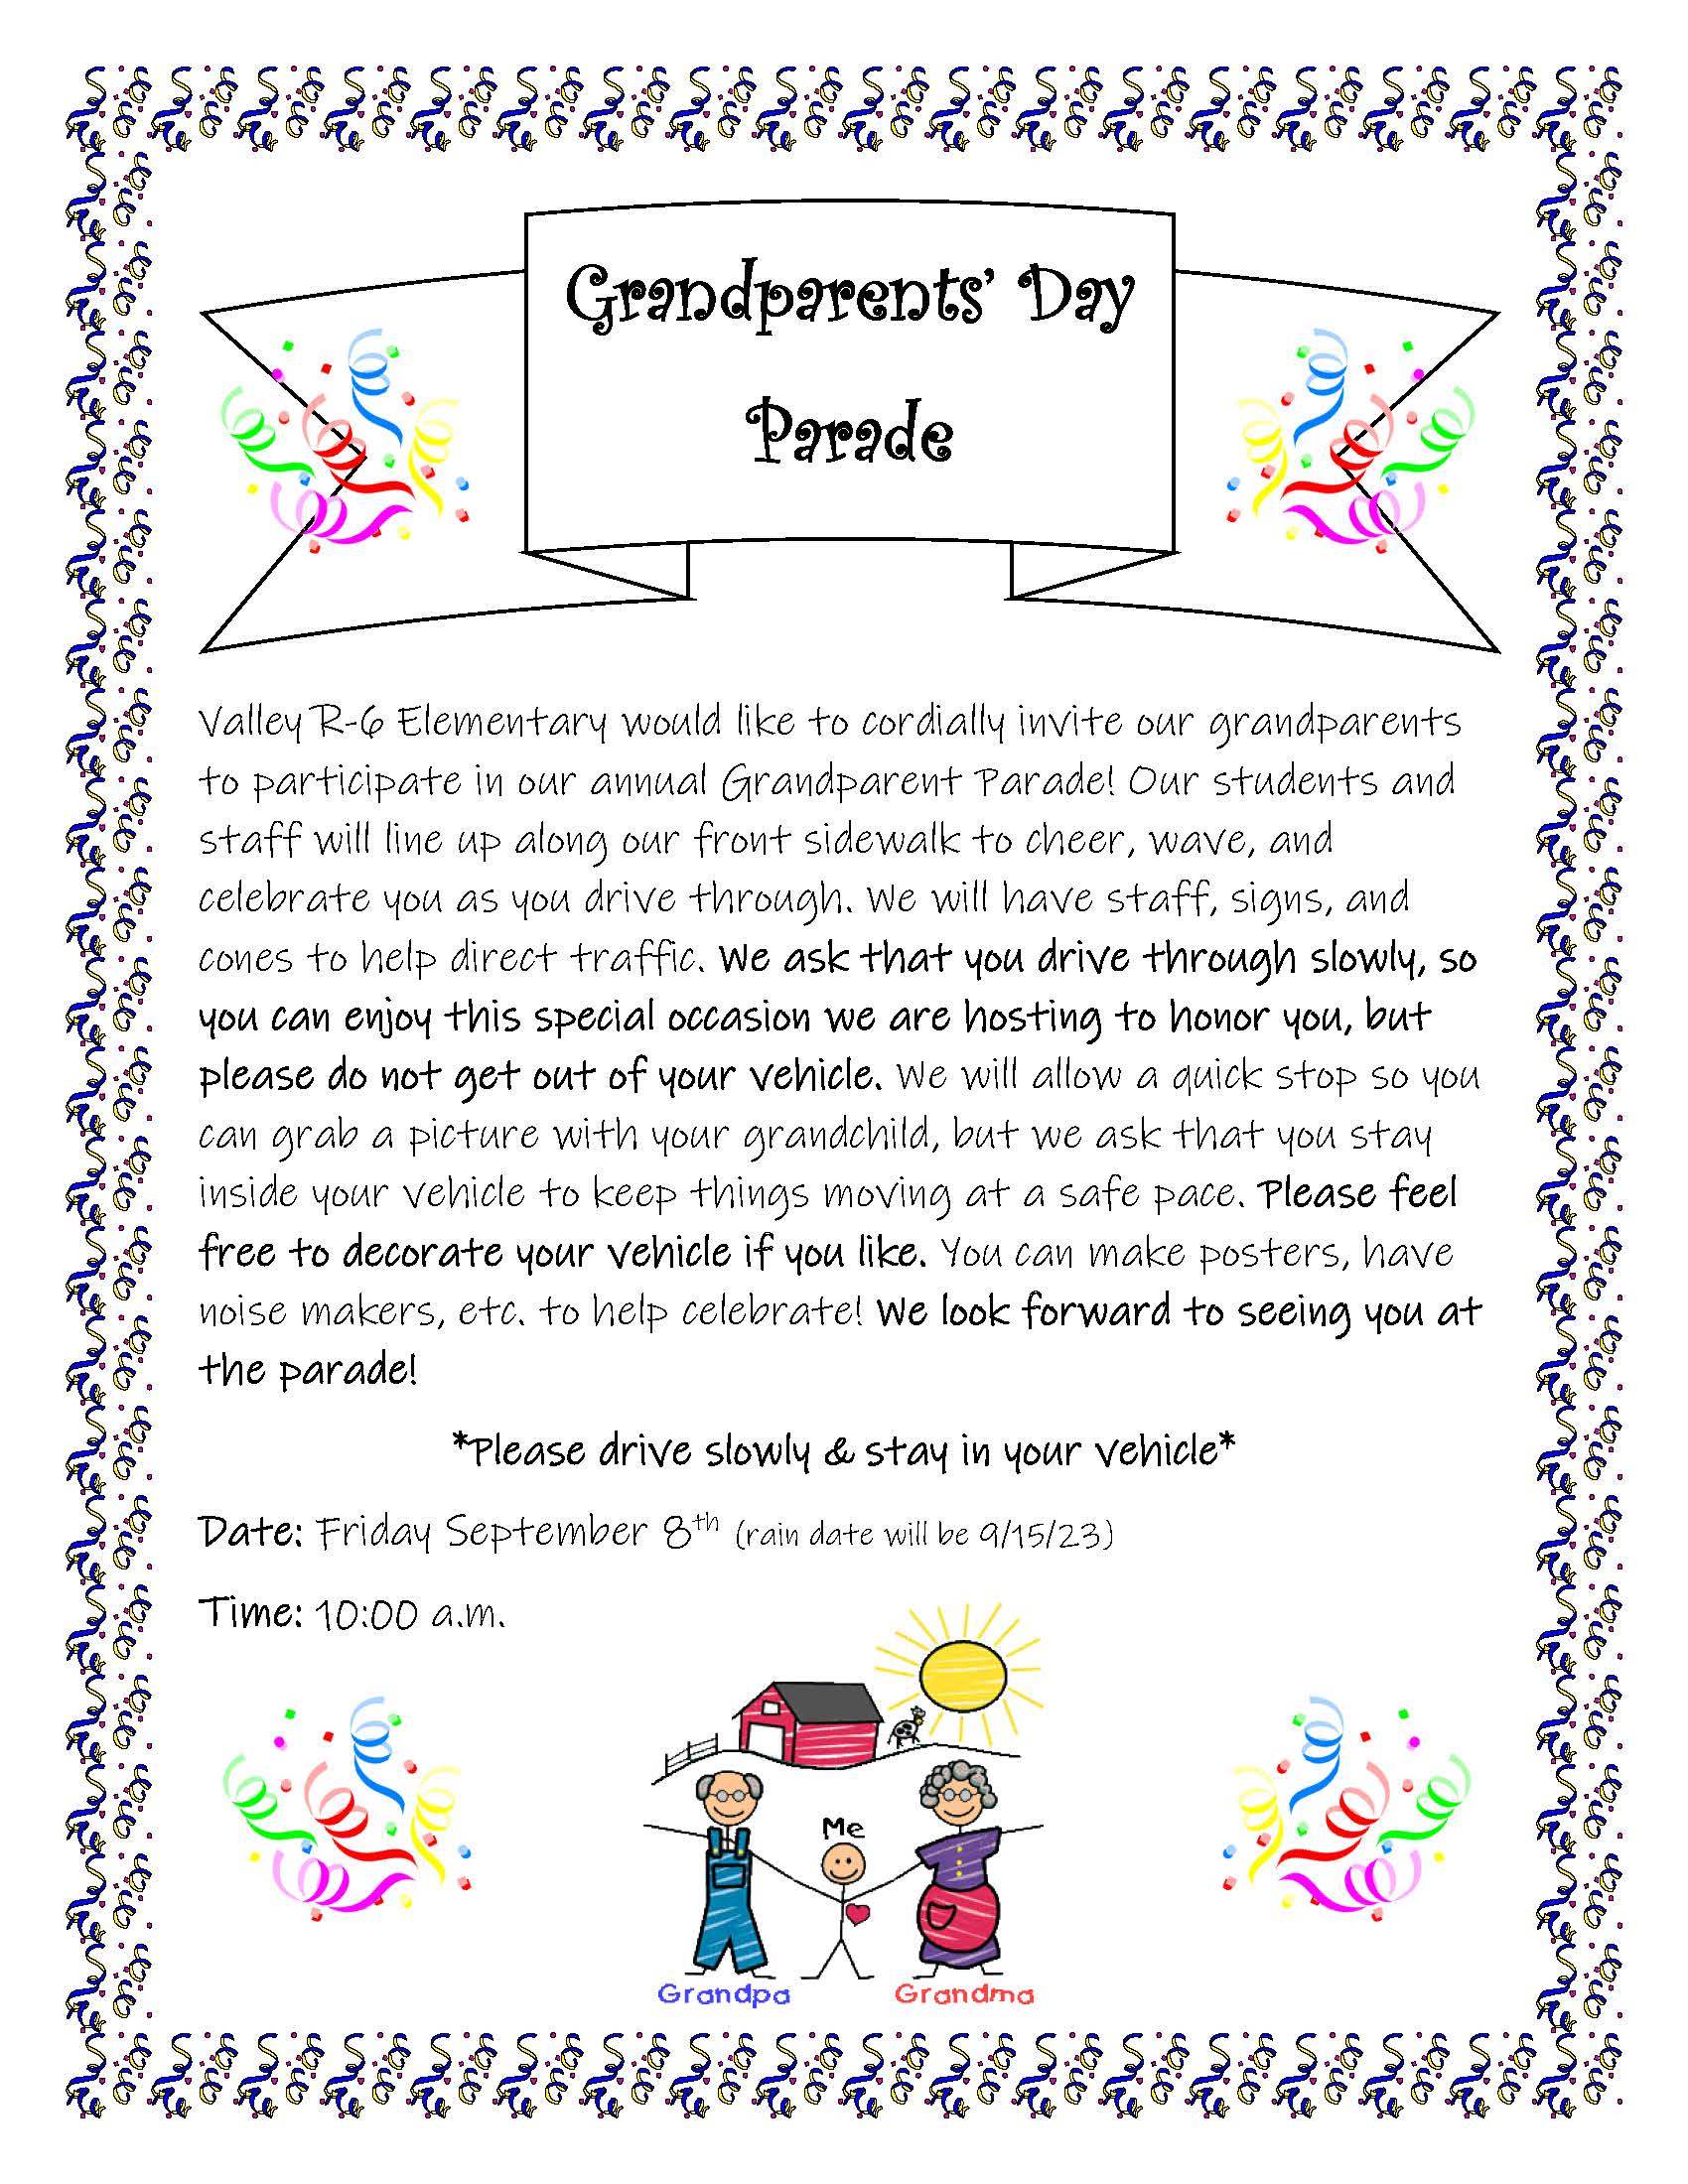 Grandparents' Day Parade flyer